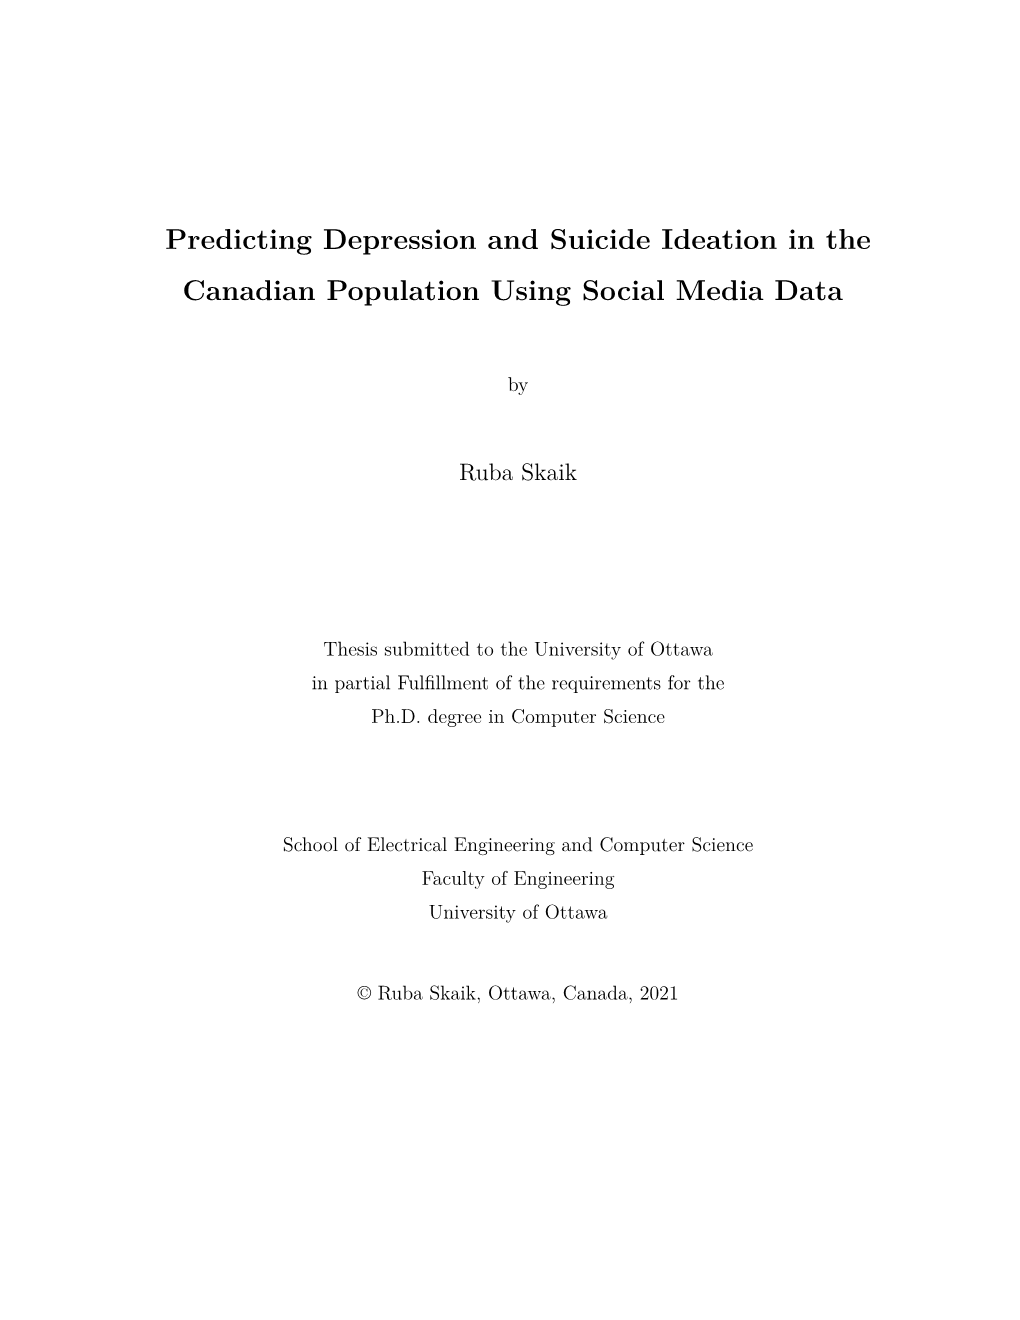 Predicting Depression and Suicide Ideation in the Canadian Population Using Social Media Data